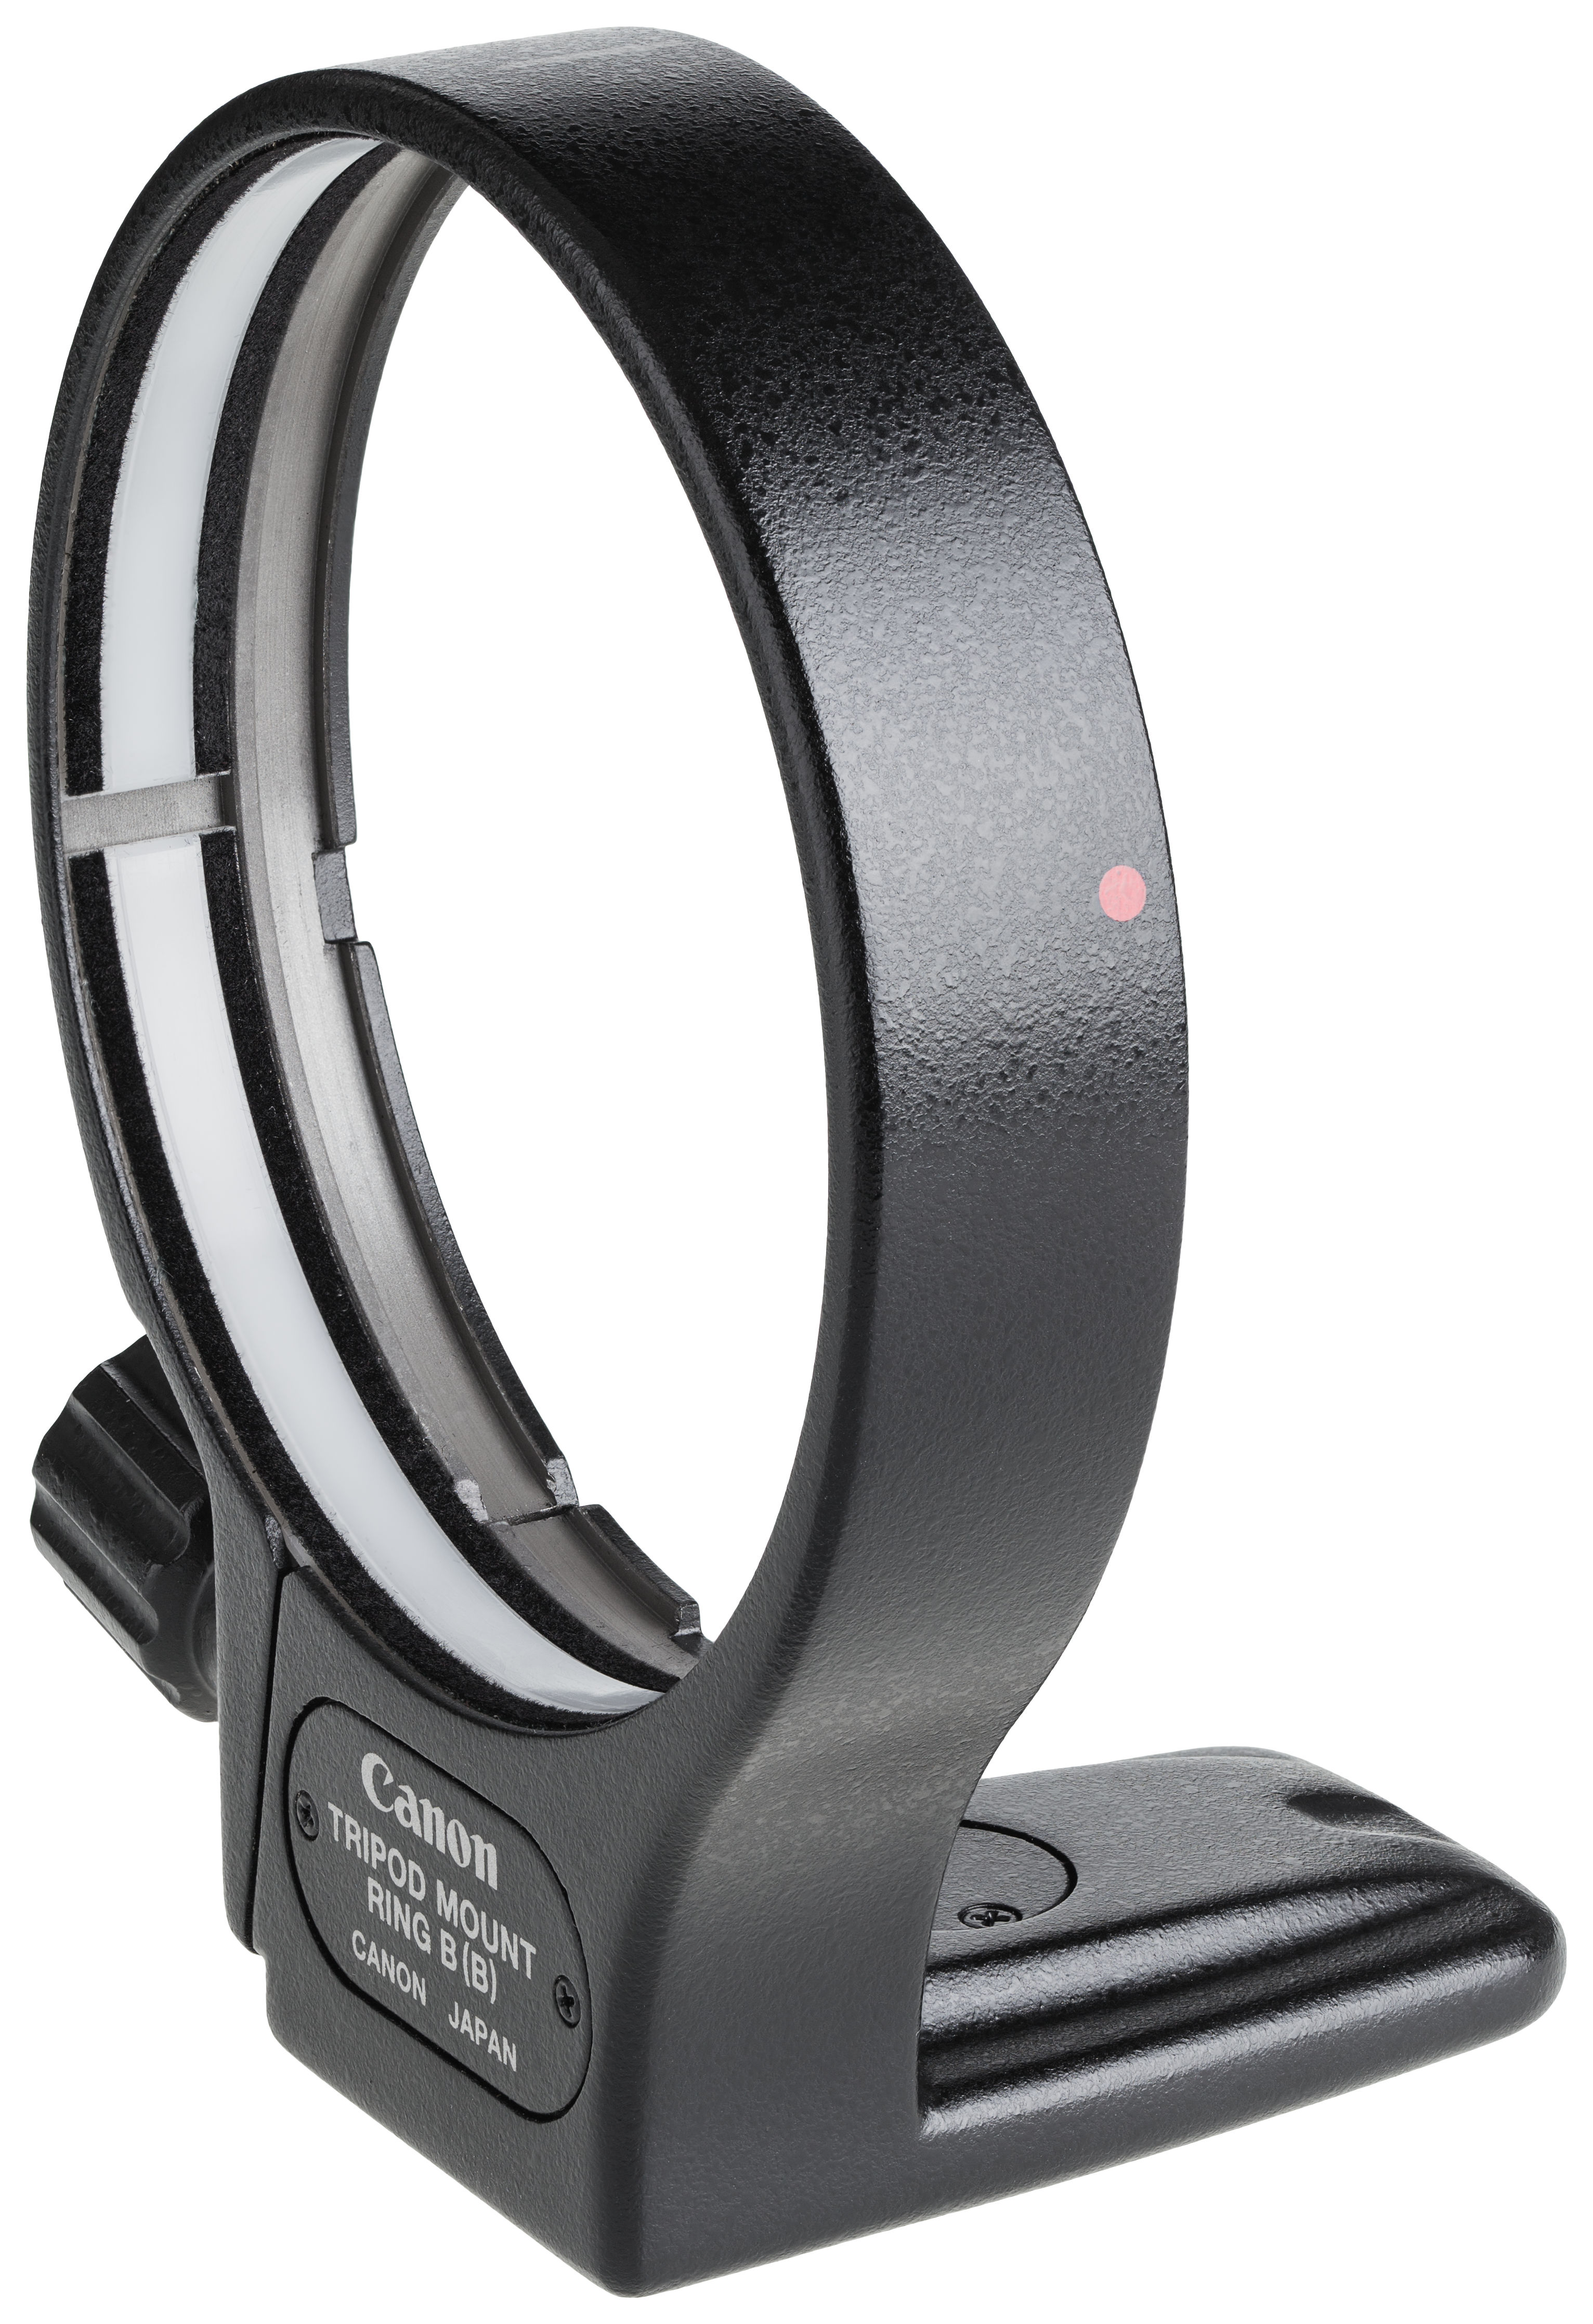 Canon Tripod Mount Ring B (B) front angled